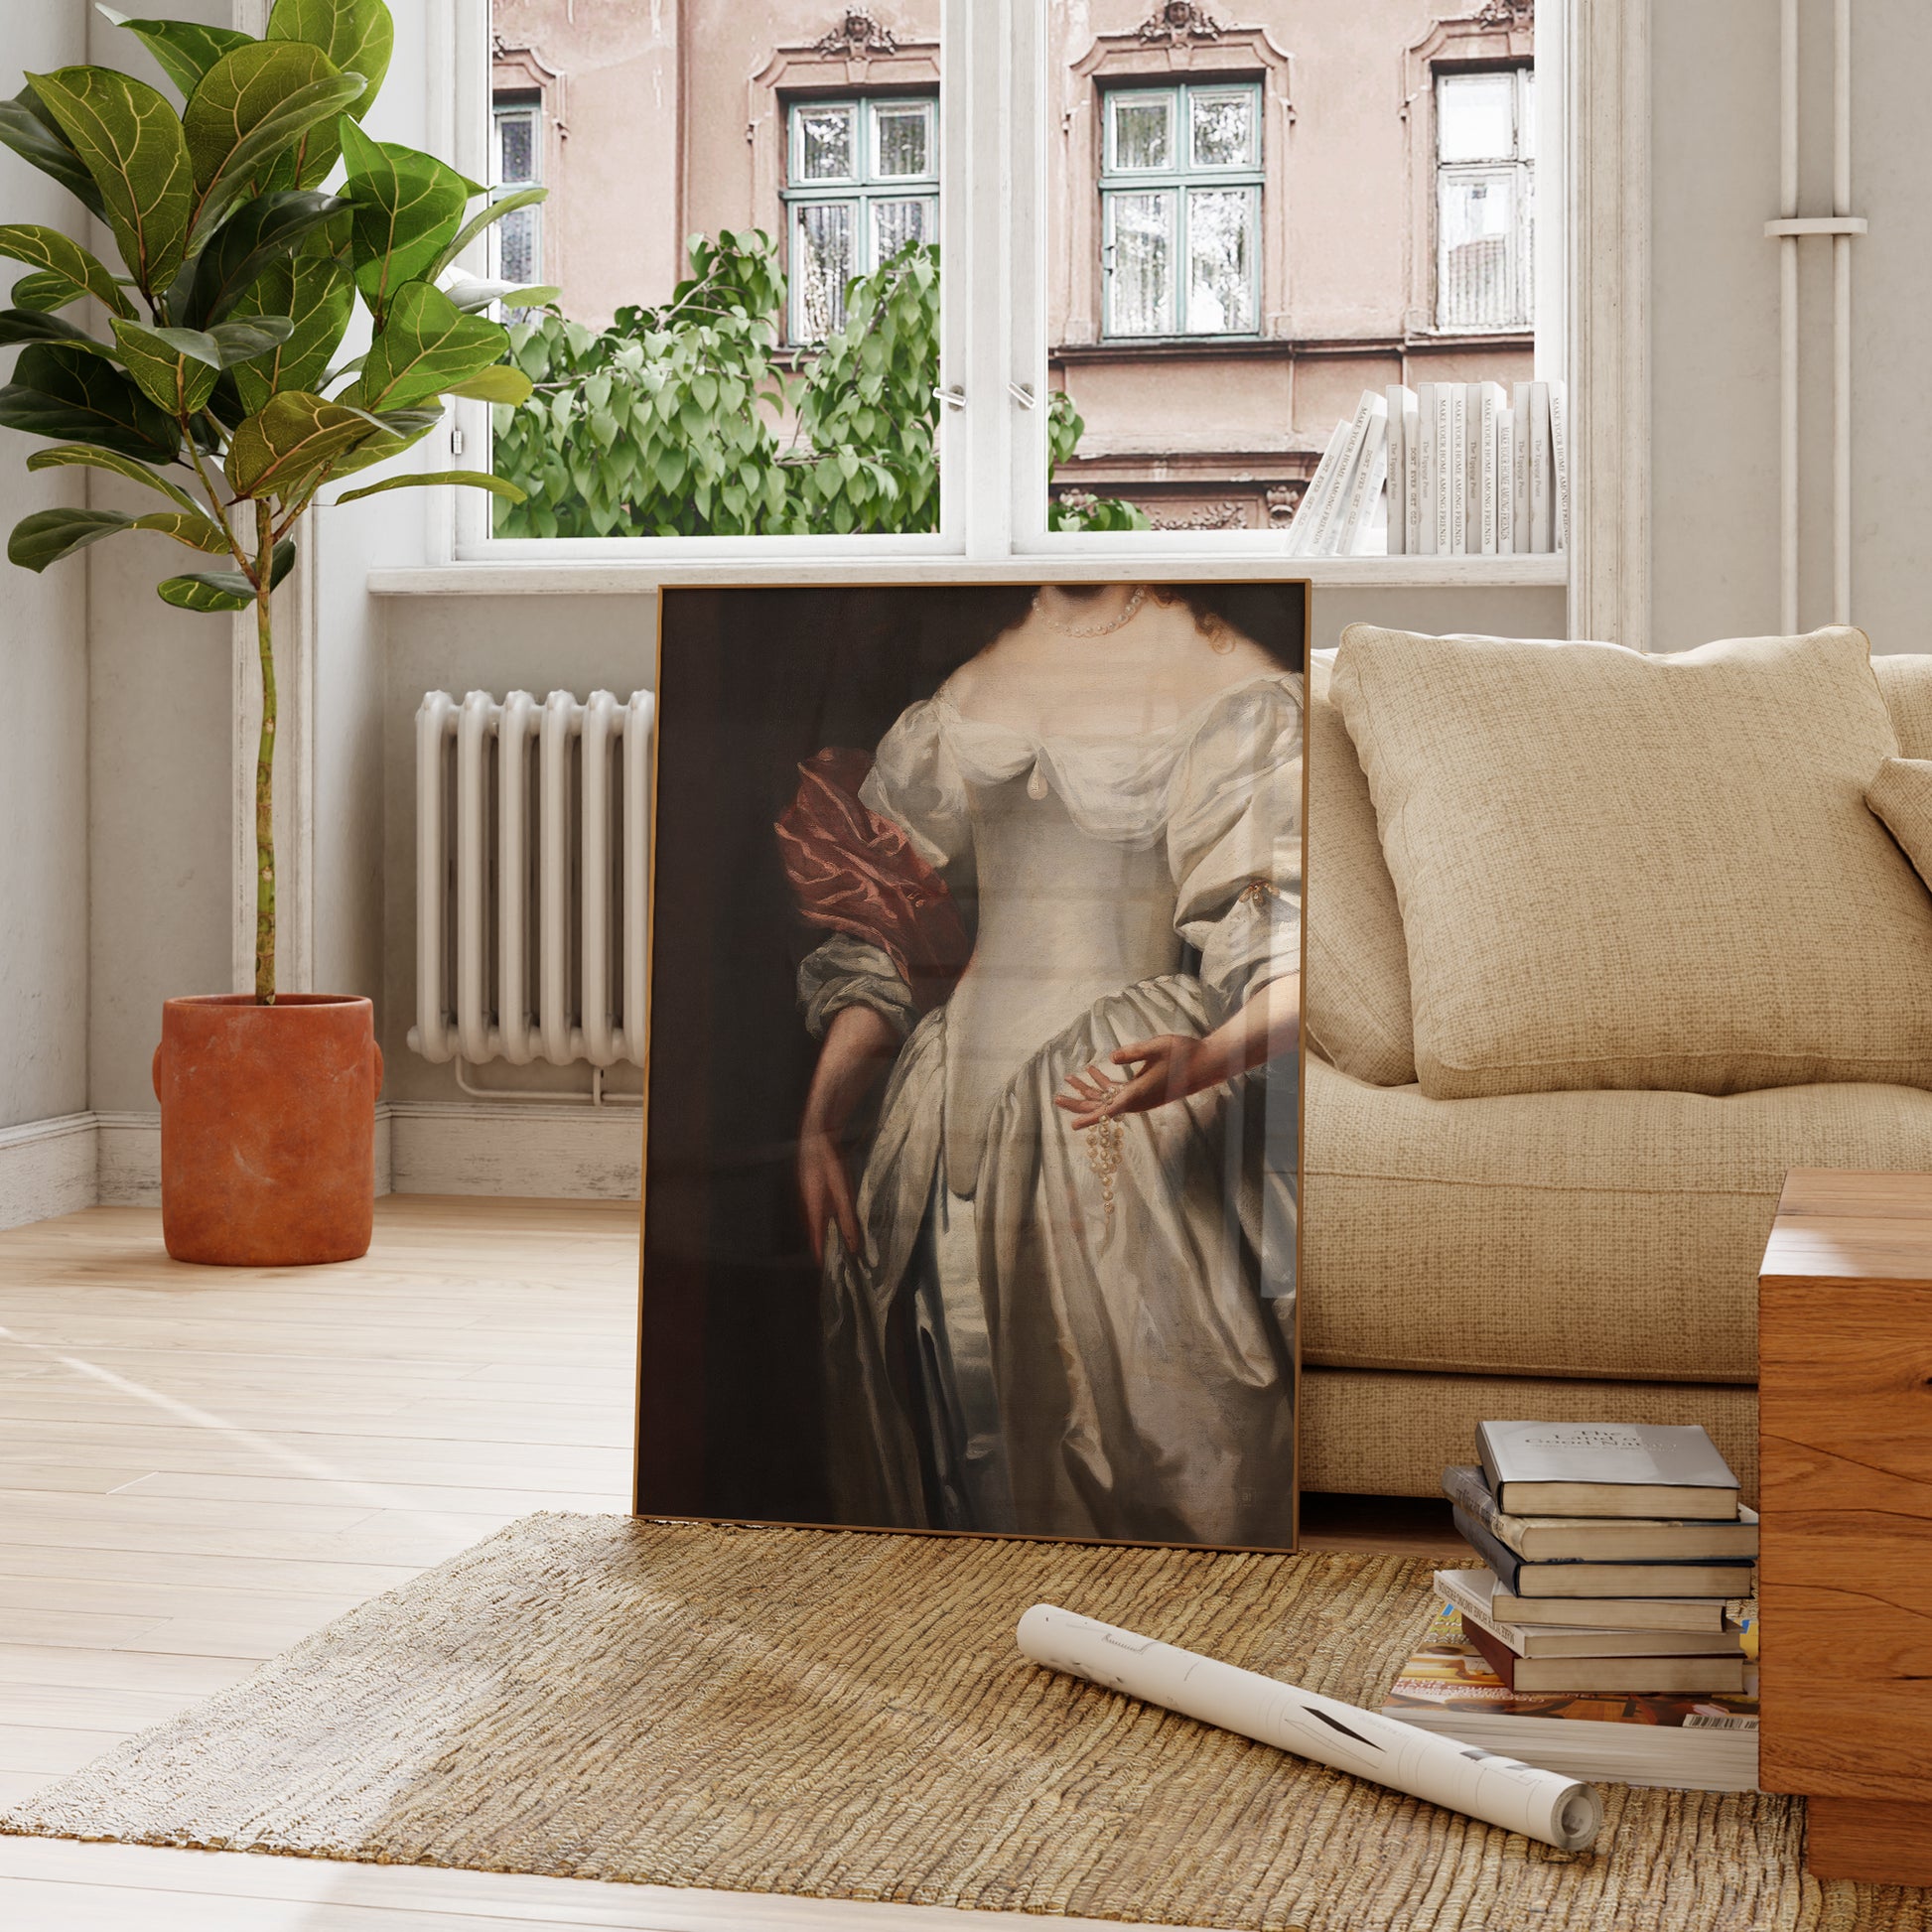 Be inspired by our altered Victorian Woman in White Satin Dress art print. This artwork was printed using the giclée process on archival acid-free paper and is presented in a french living room that captures its timeless beauty in every detail.